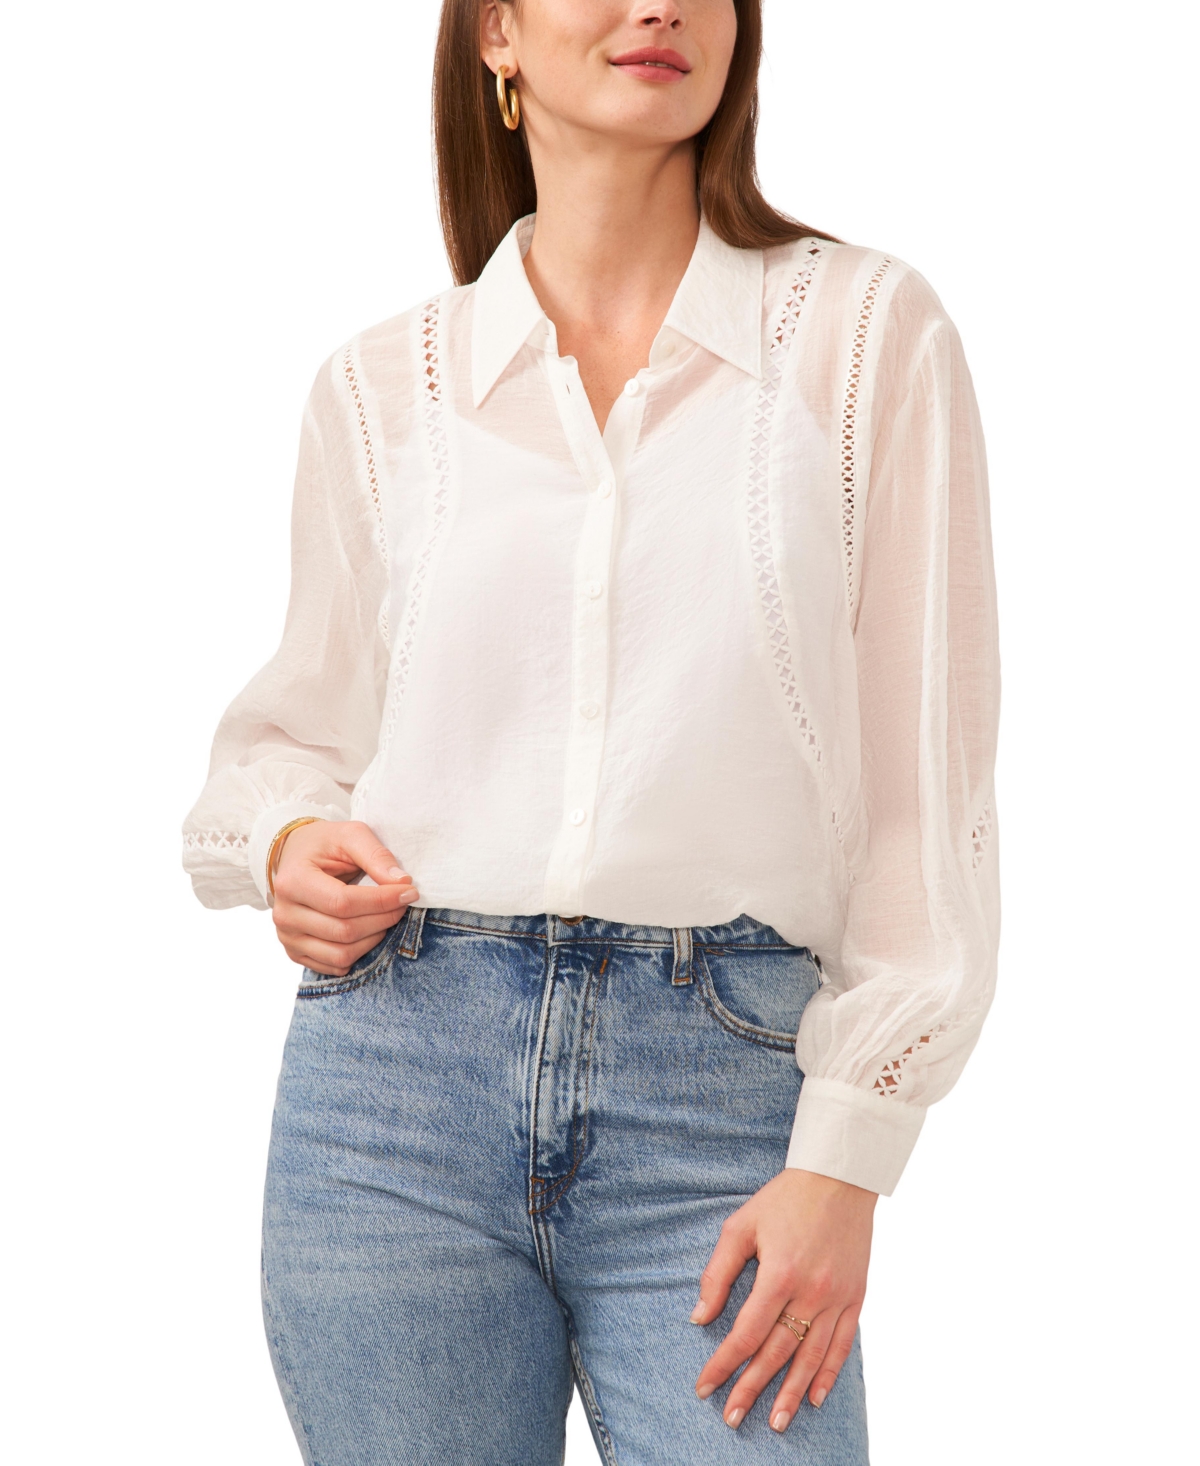 Women's Button-Down Pointelle Top - New Ivory